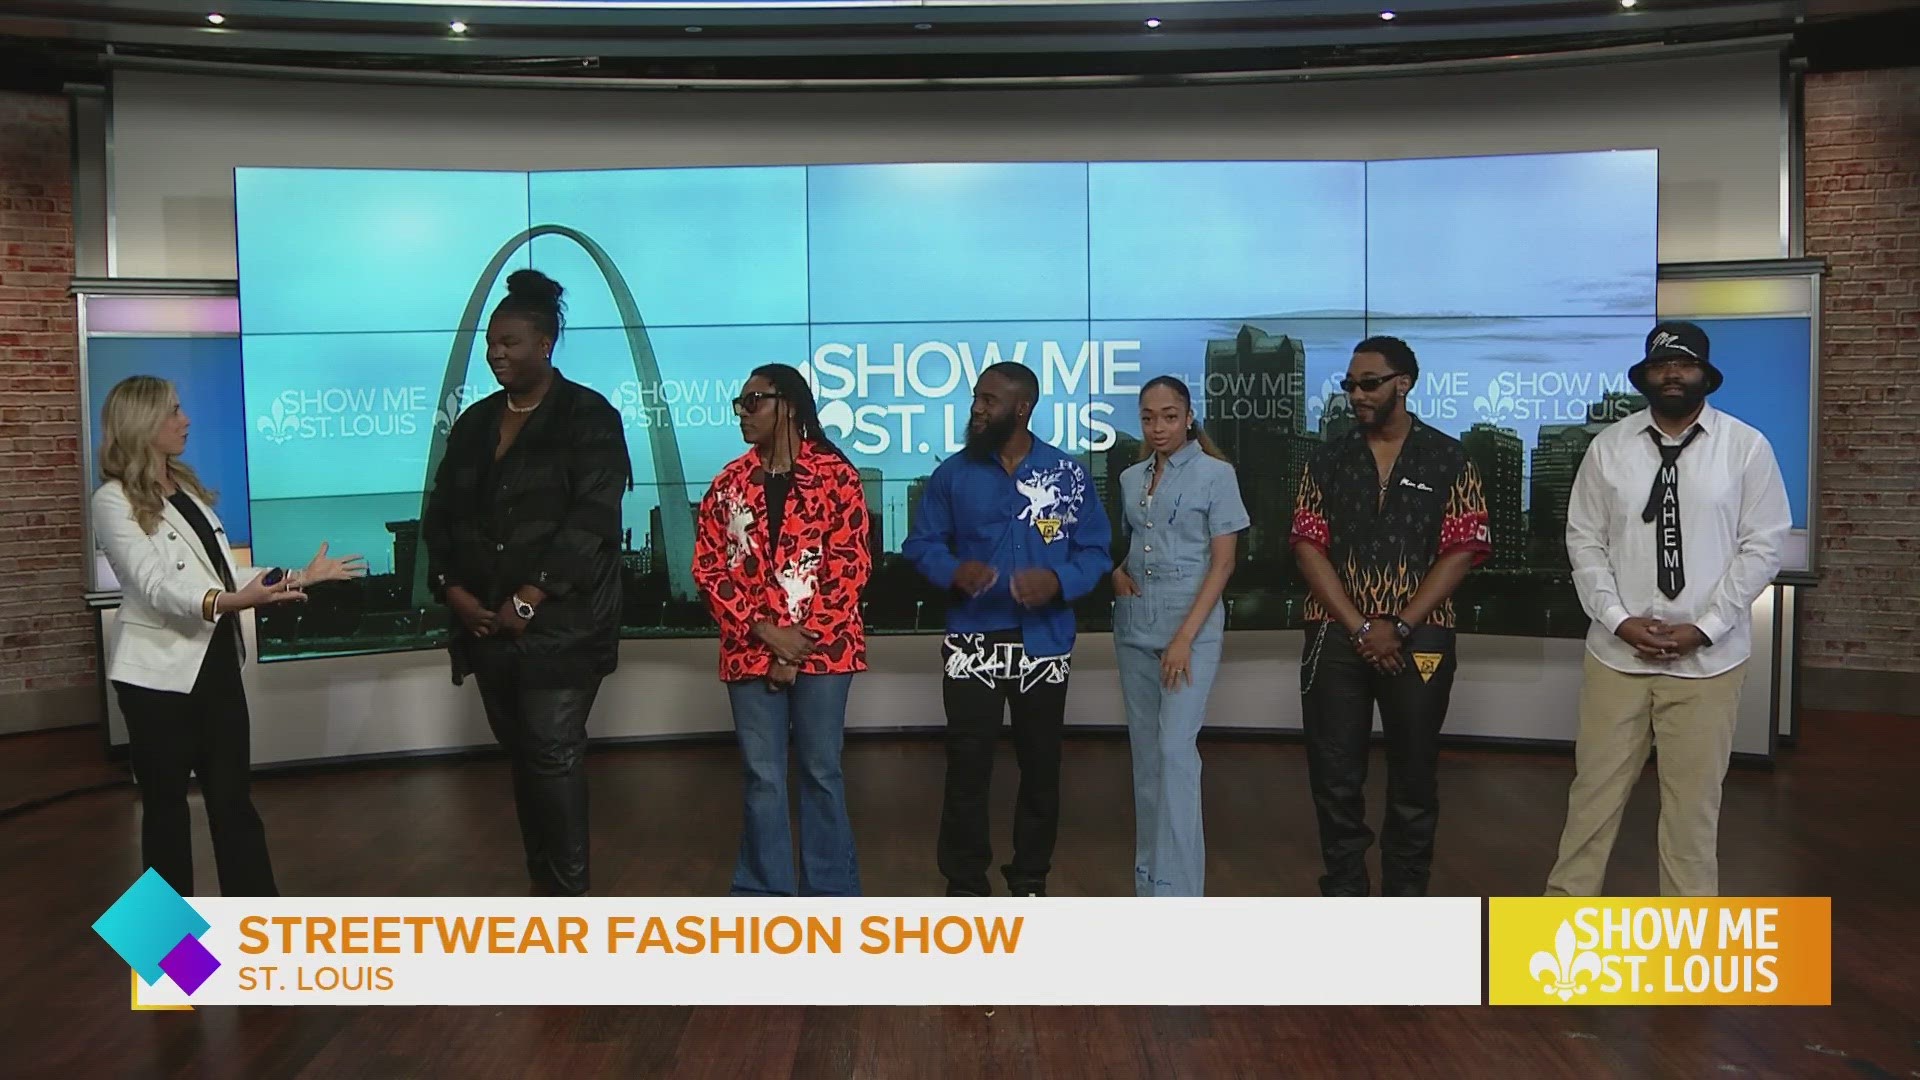 The Show Me team gets a sneak peak at some of the looks and styles this year.